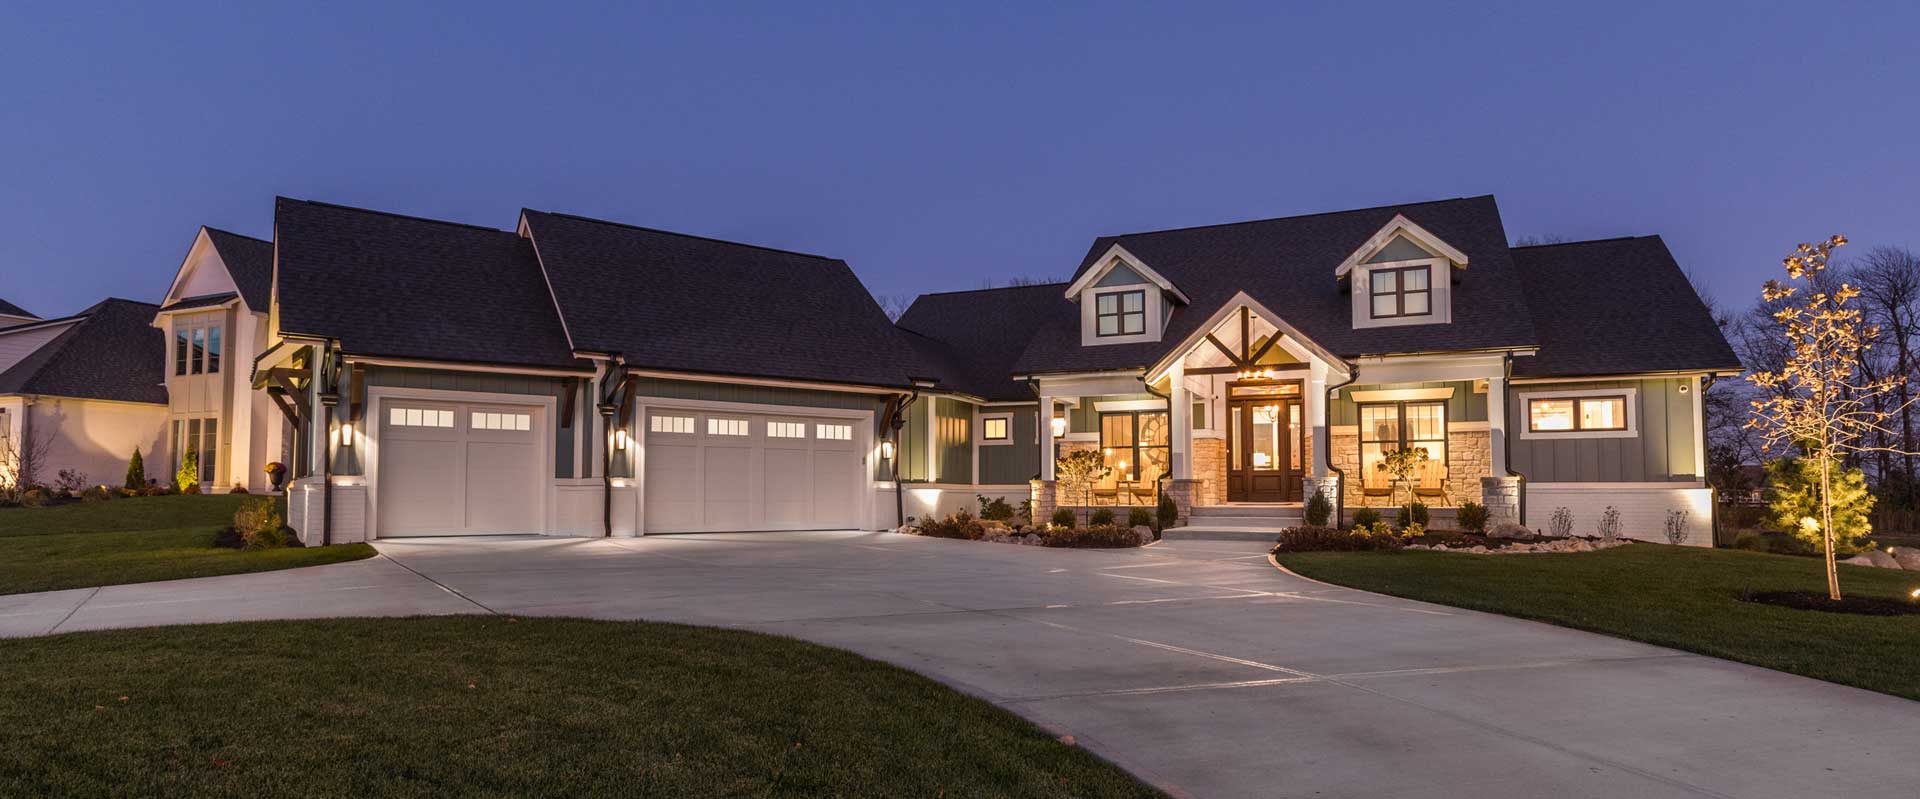 Whicker Construction - Plainfield, IN, US, home builders indianapolis